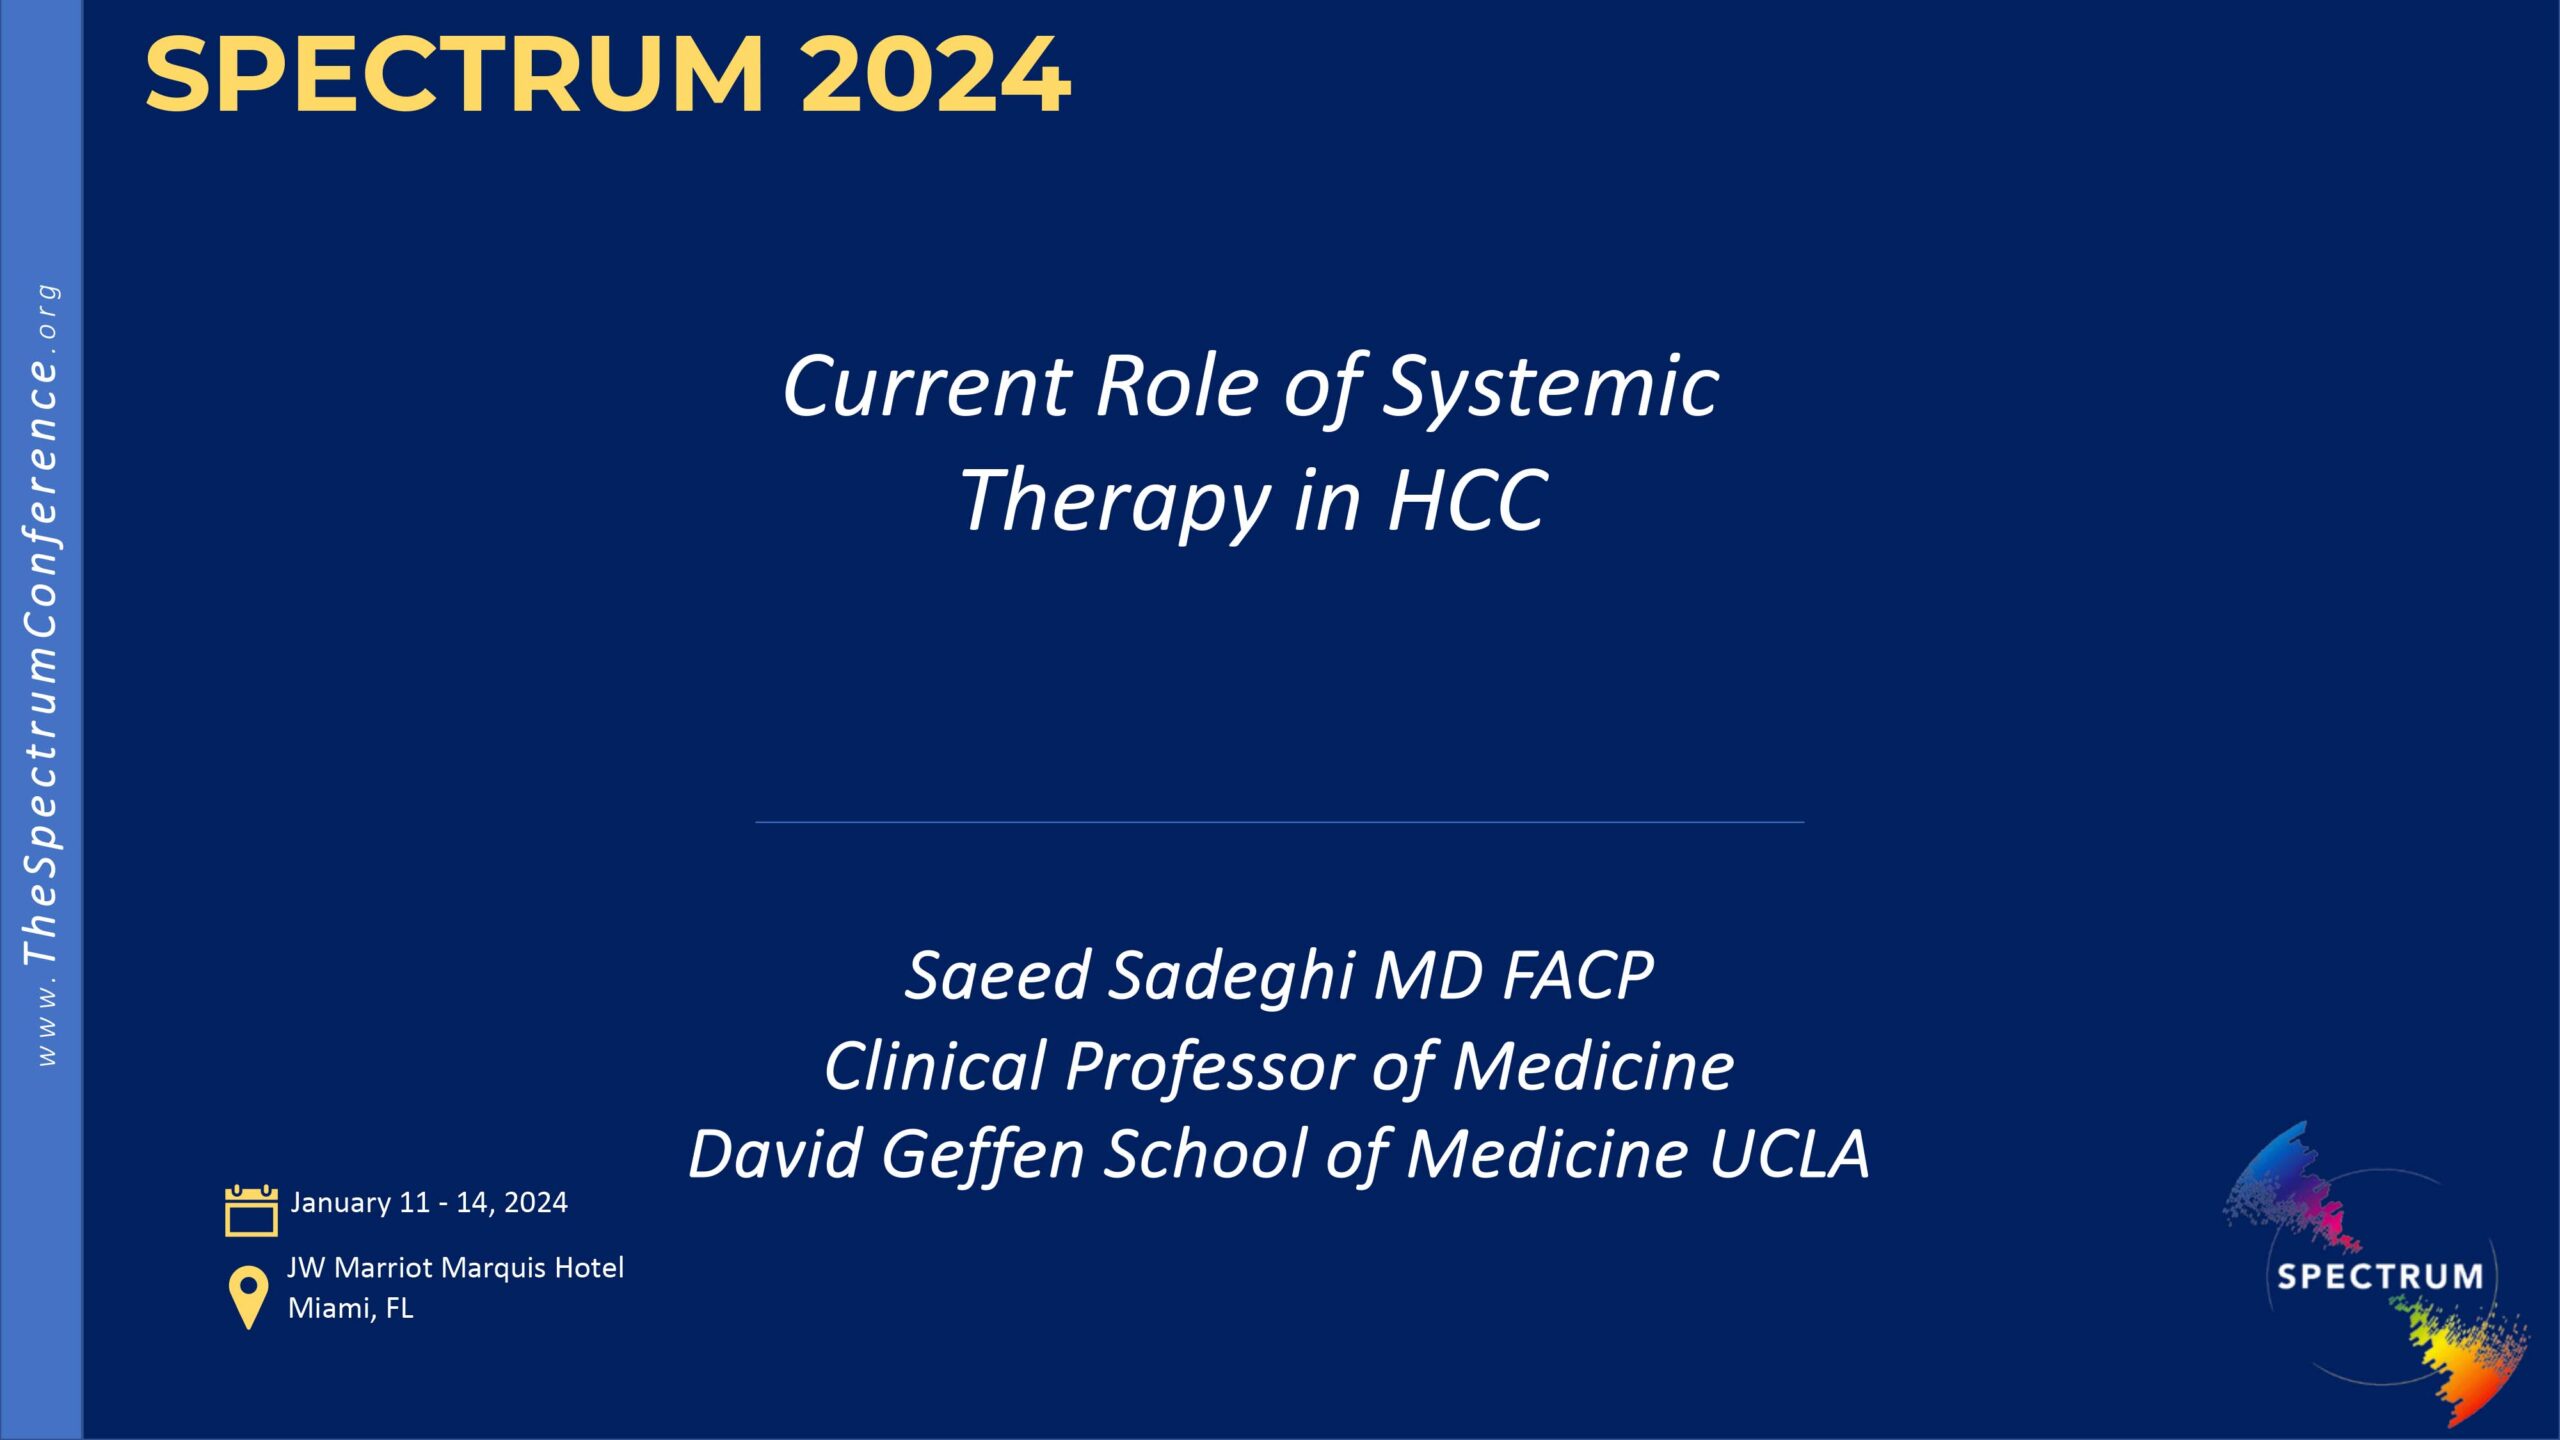 Current role of systemic therapy in HCC